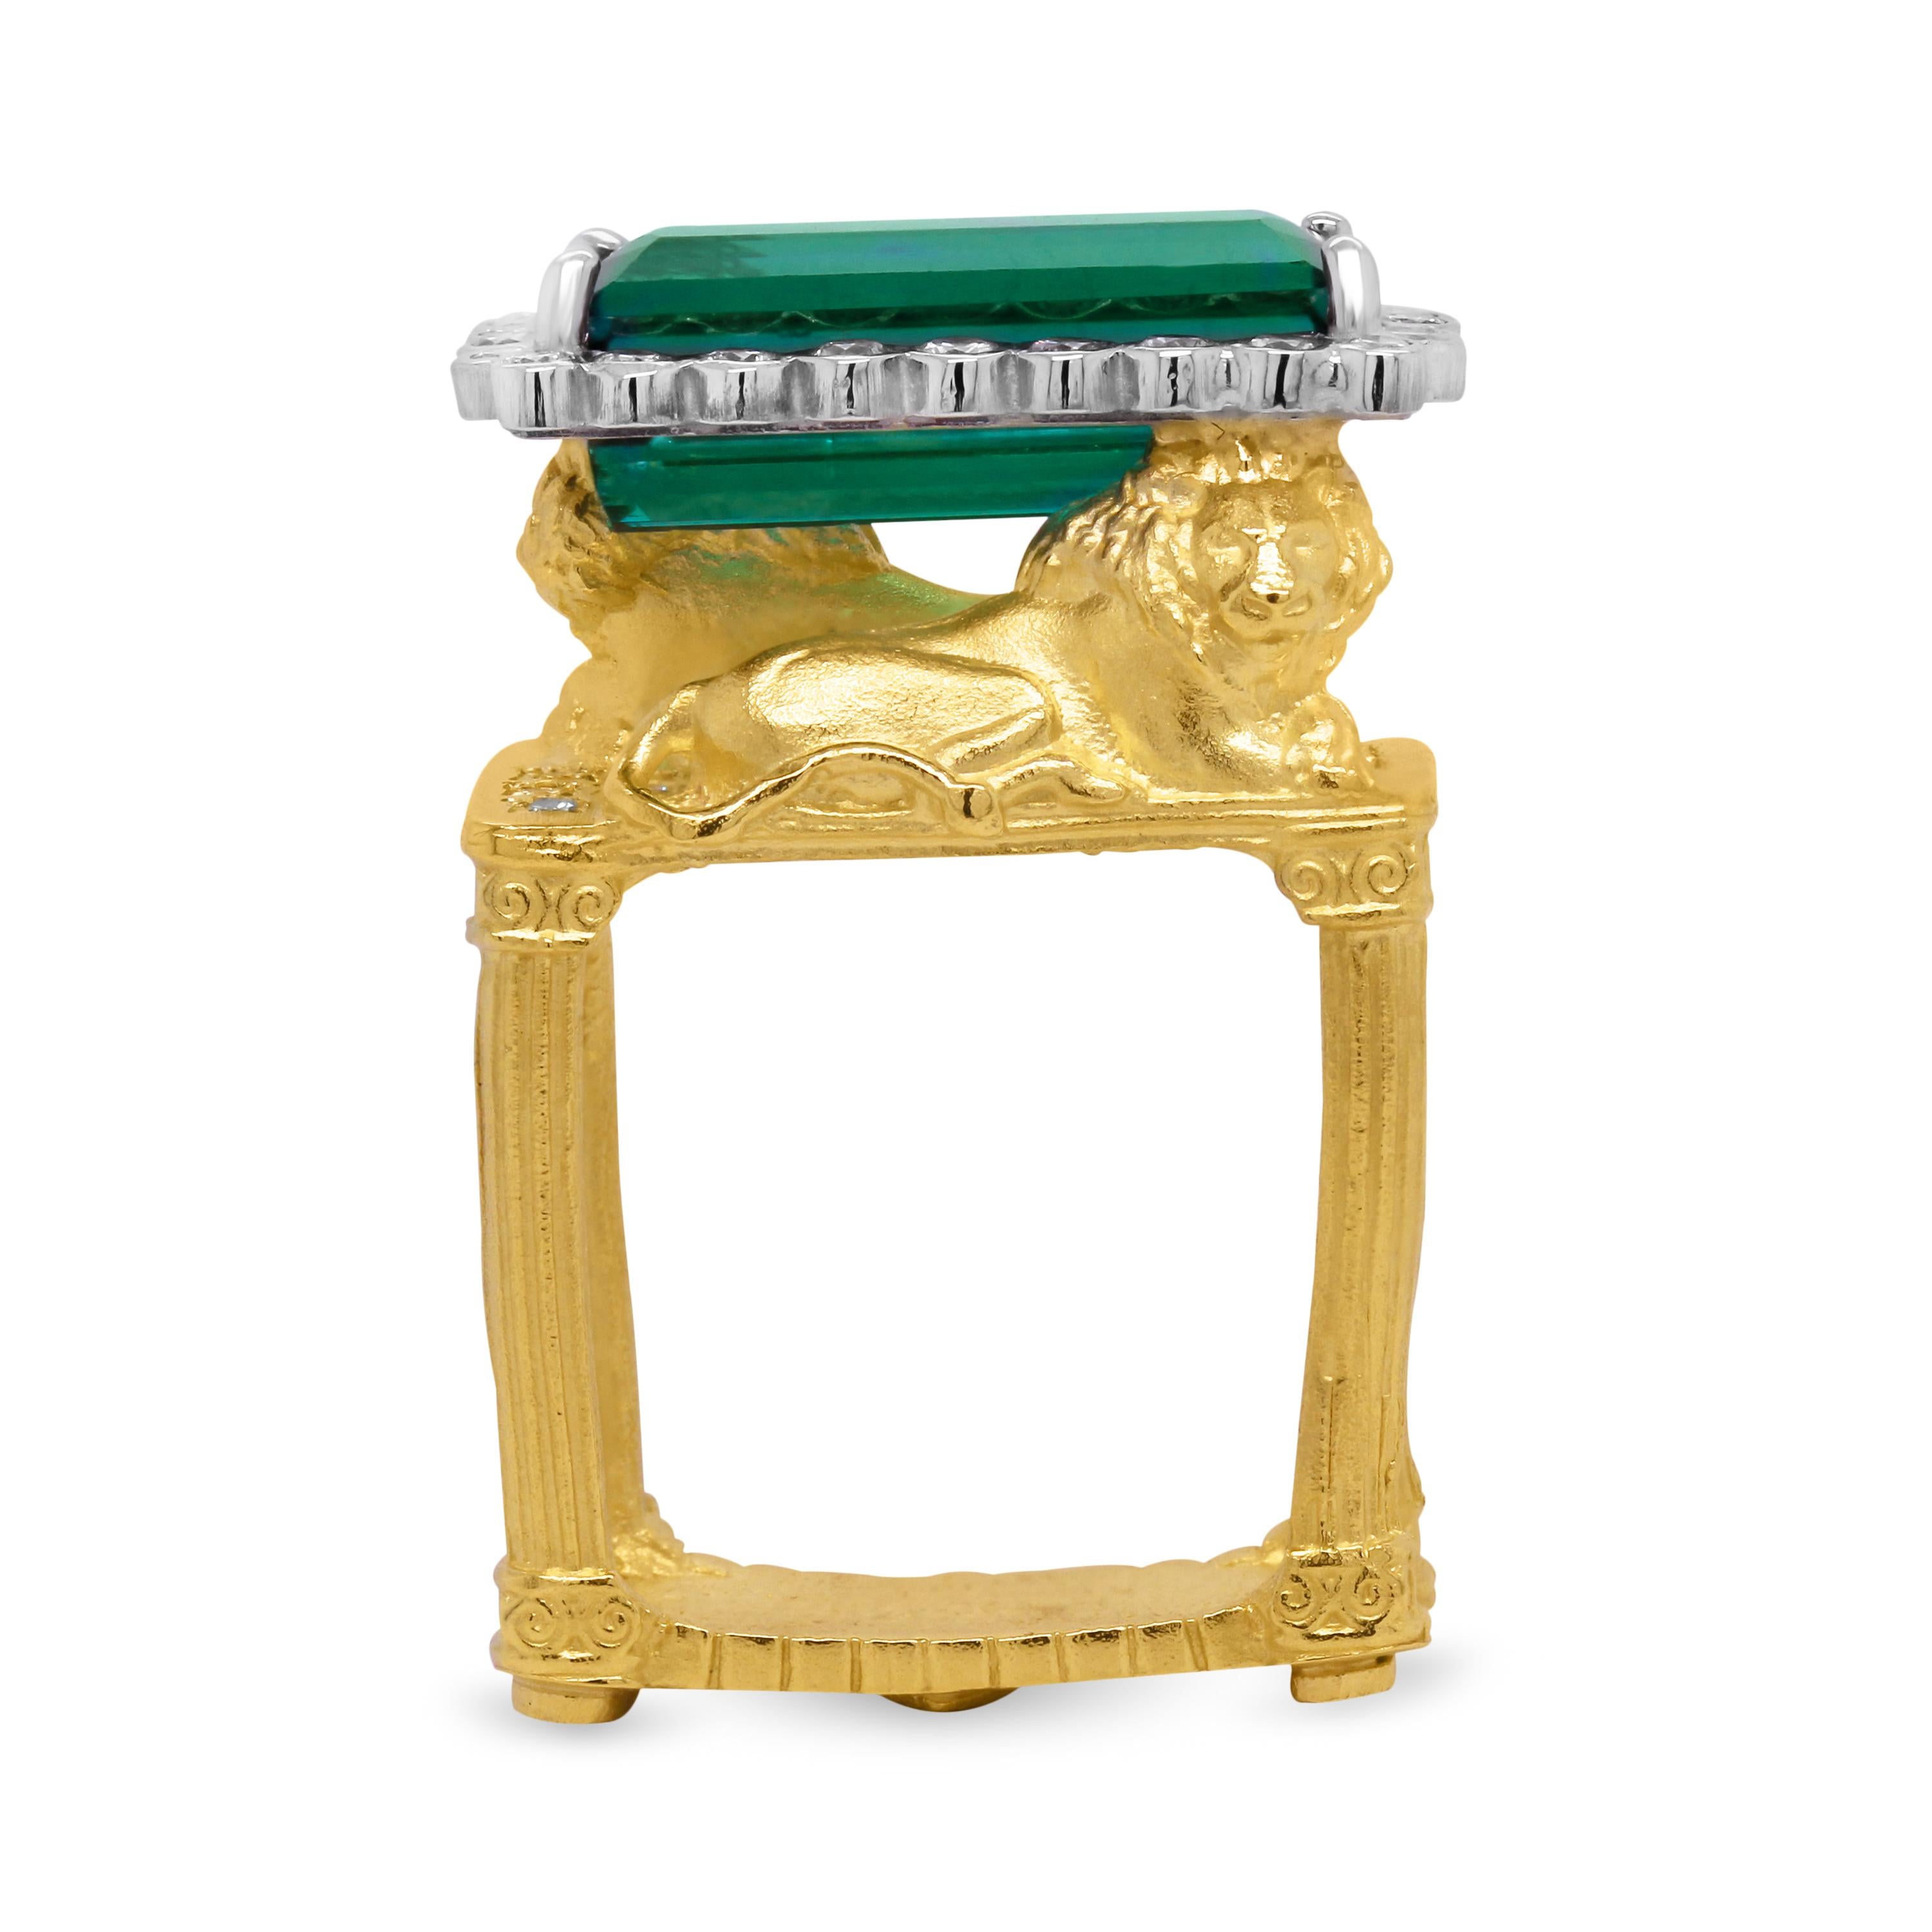 Stambolian 18 Karat Yellow Gold Diamond Green Tourmaline Two Lions Cocktail Ring

This one-of-a-kind ring by Stambolian is named the 